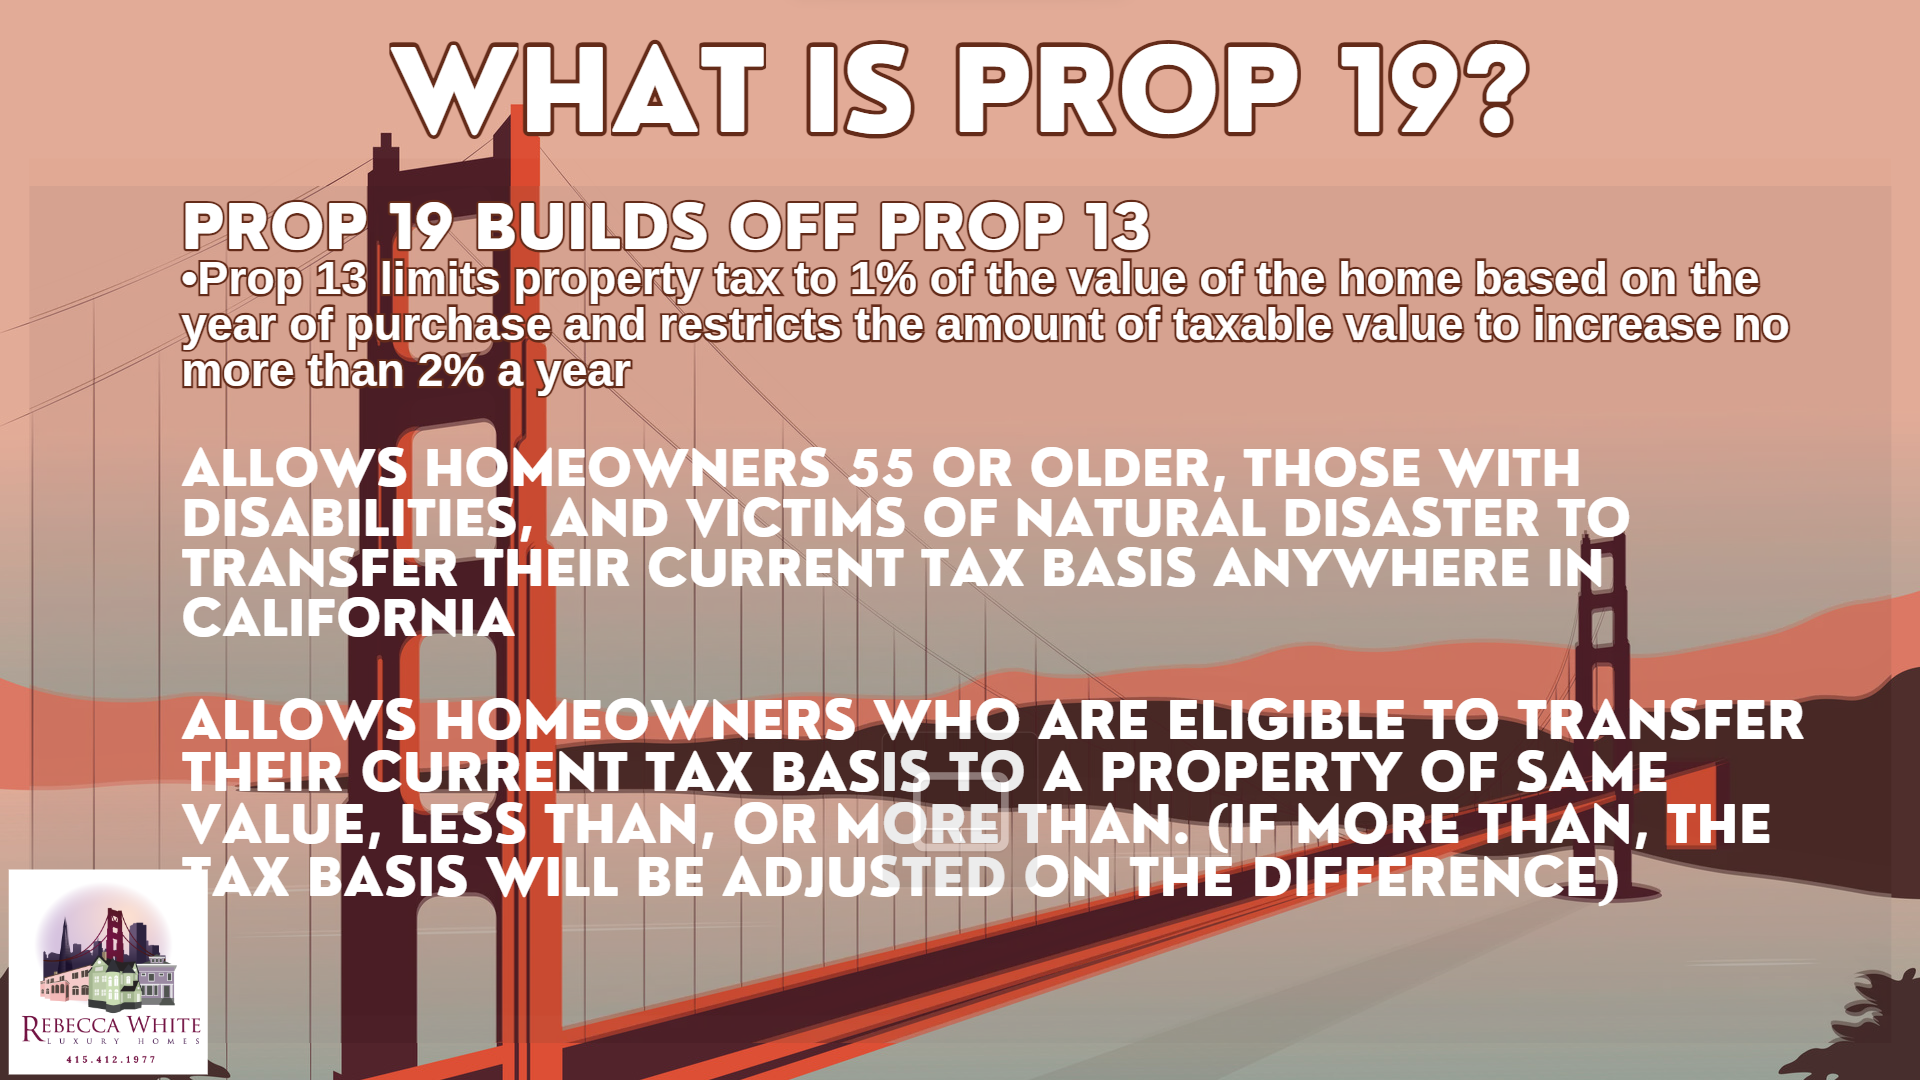 Key points about California's Prop 19